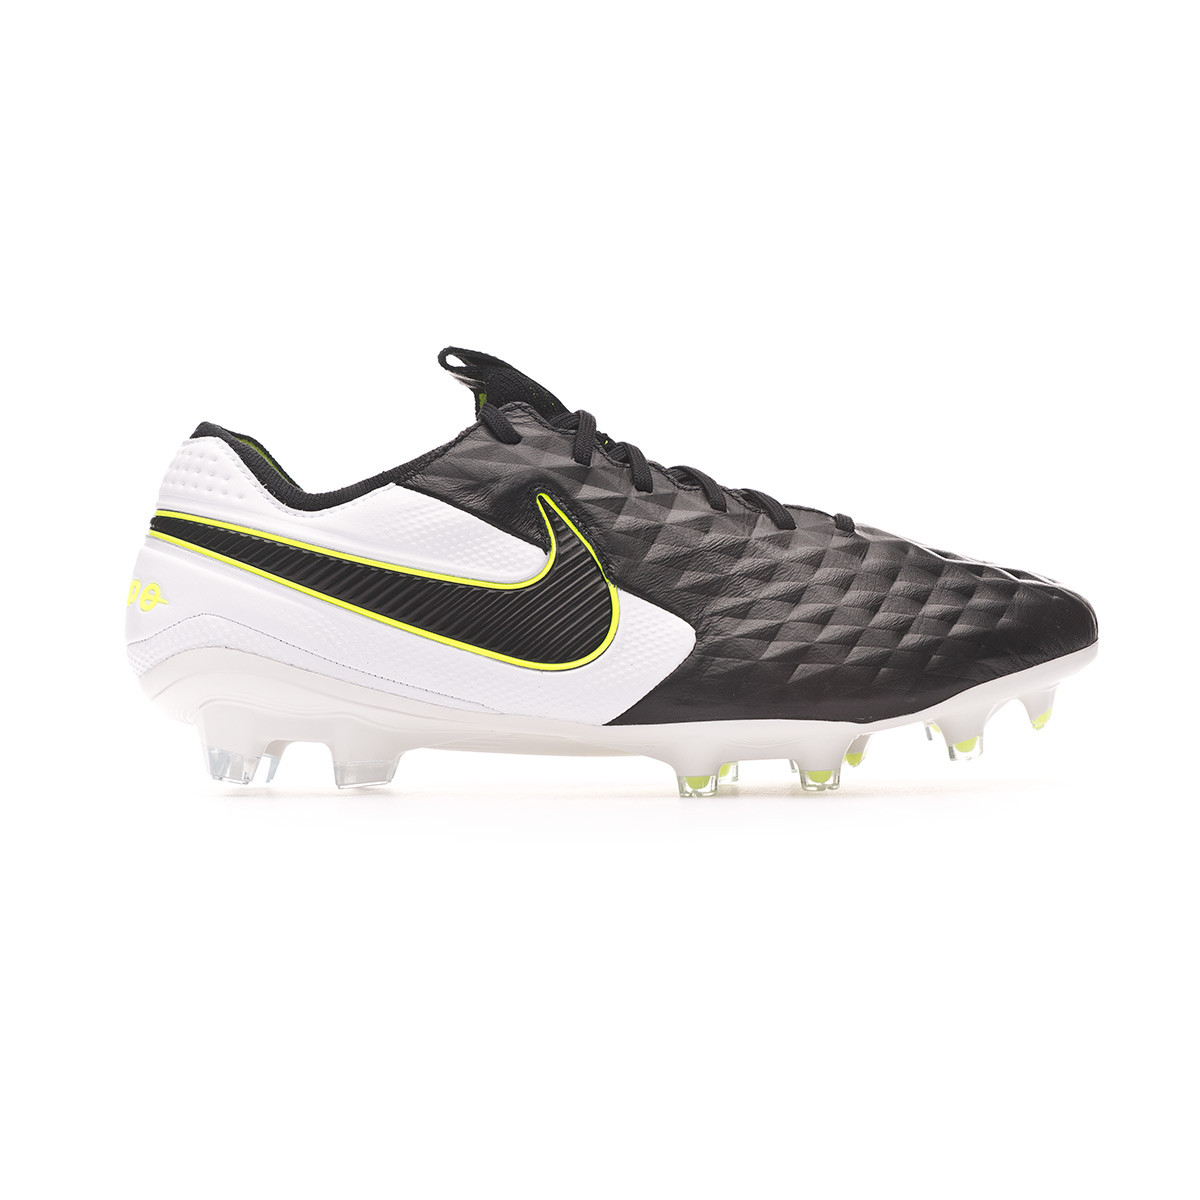 Initial Reaction Nike Time Legend 8 Elite Soccer Cleats.